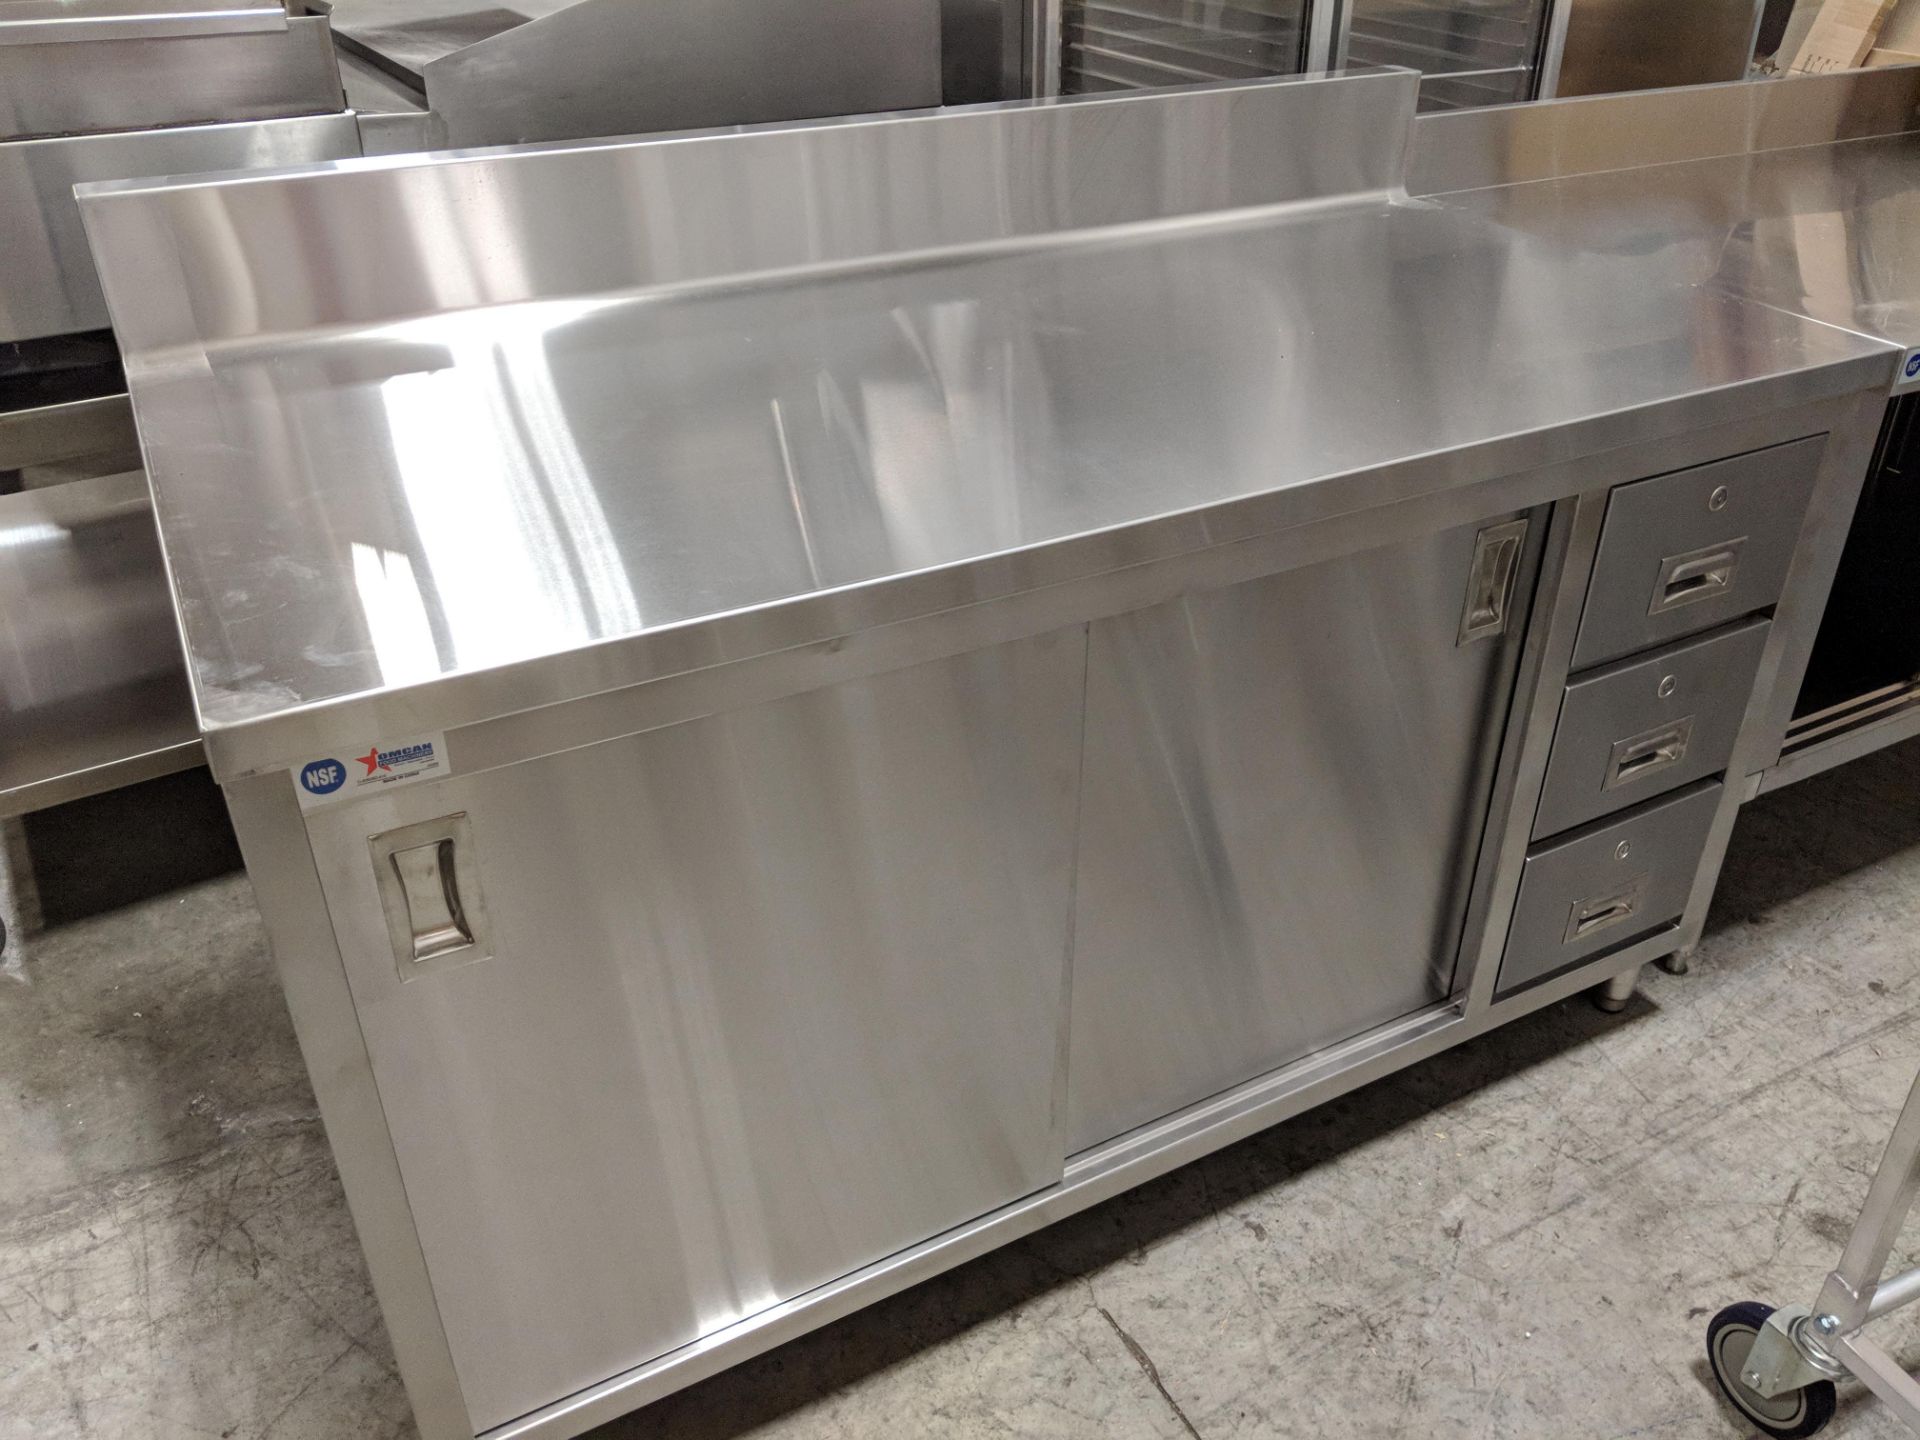 30" x 60" Stainless Work Table with Cabinet and Drawers - Image 3 of 6